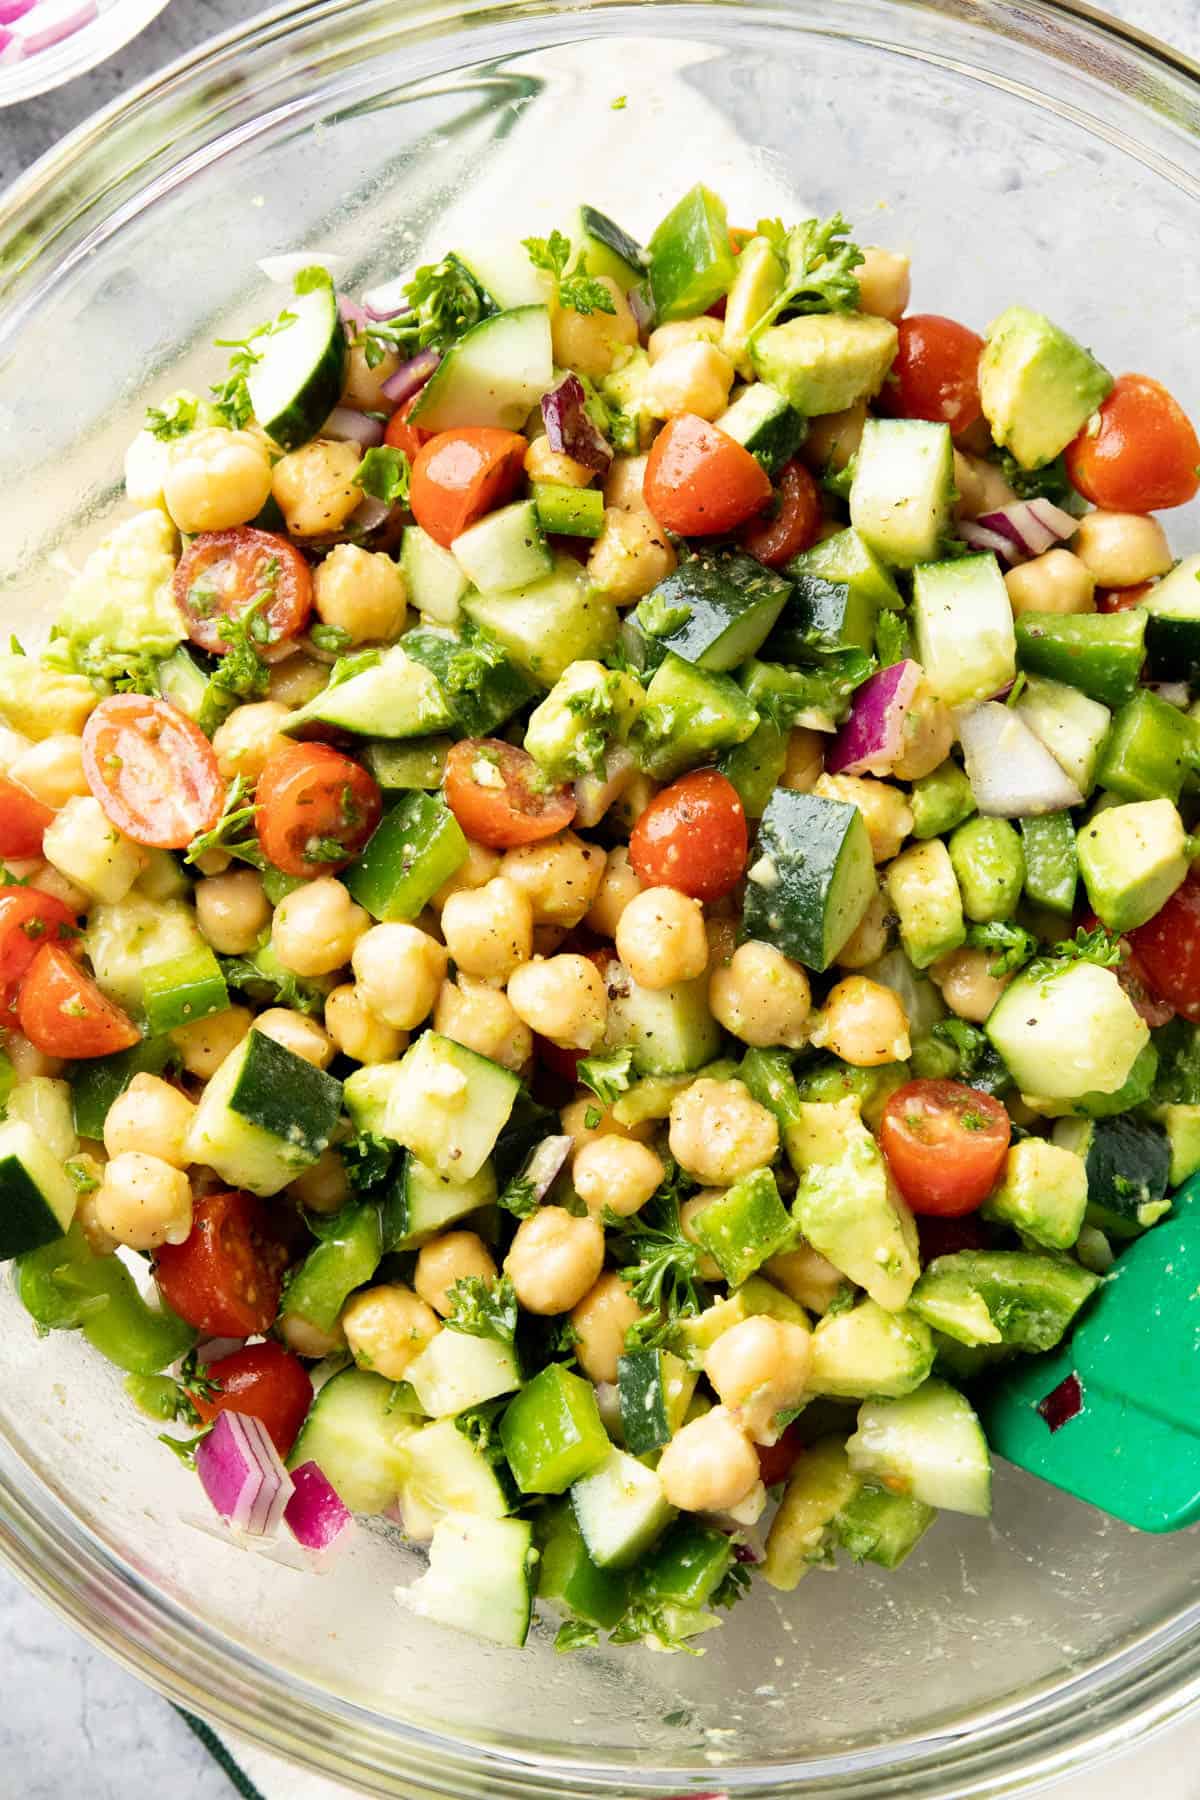 Closeup photo of Chickpea Salad to show texture